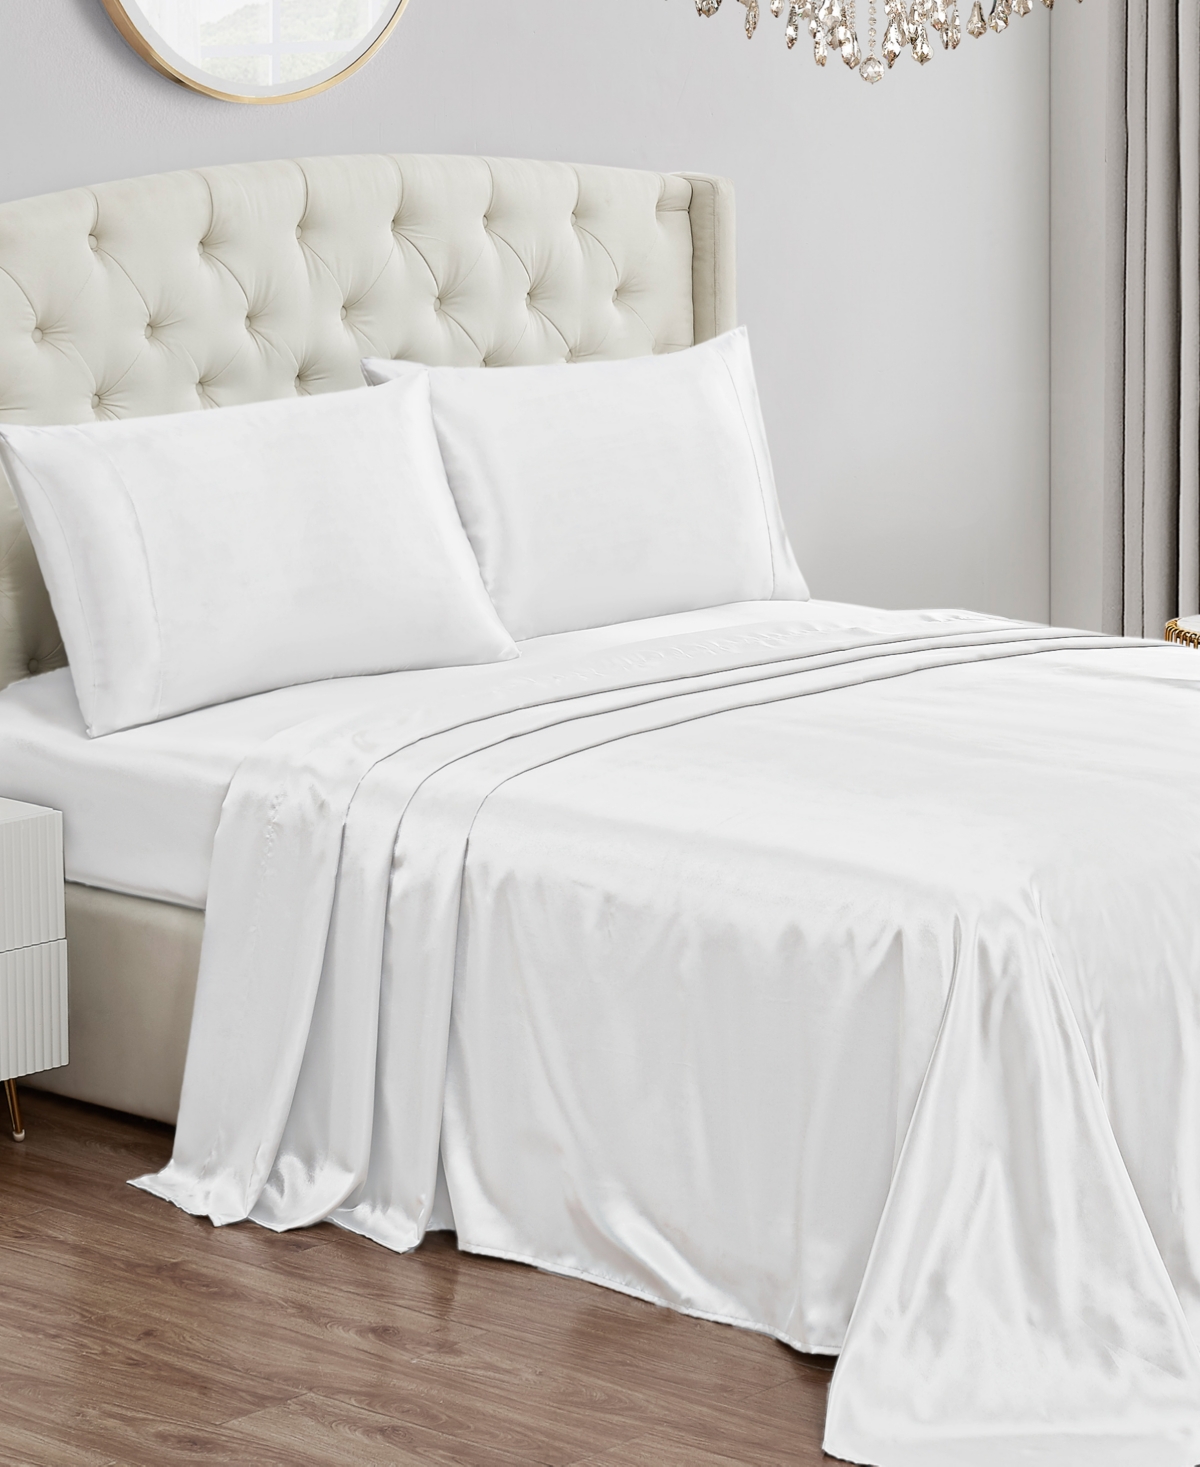 Juicy Couture Satin 4 Piece Sheet Set, Full In Pure White